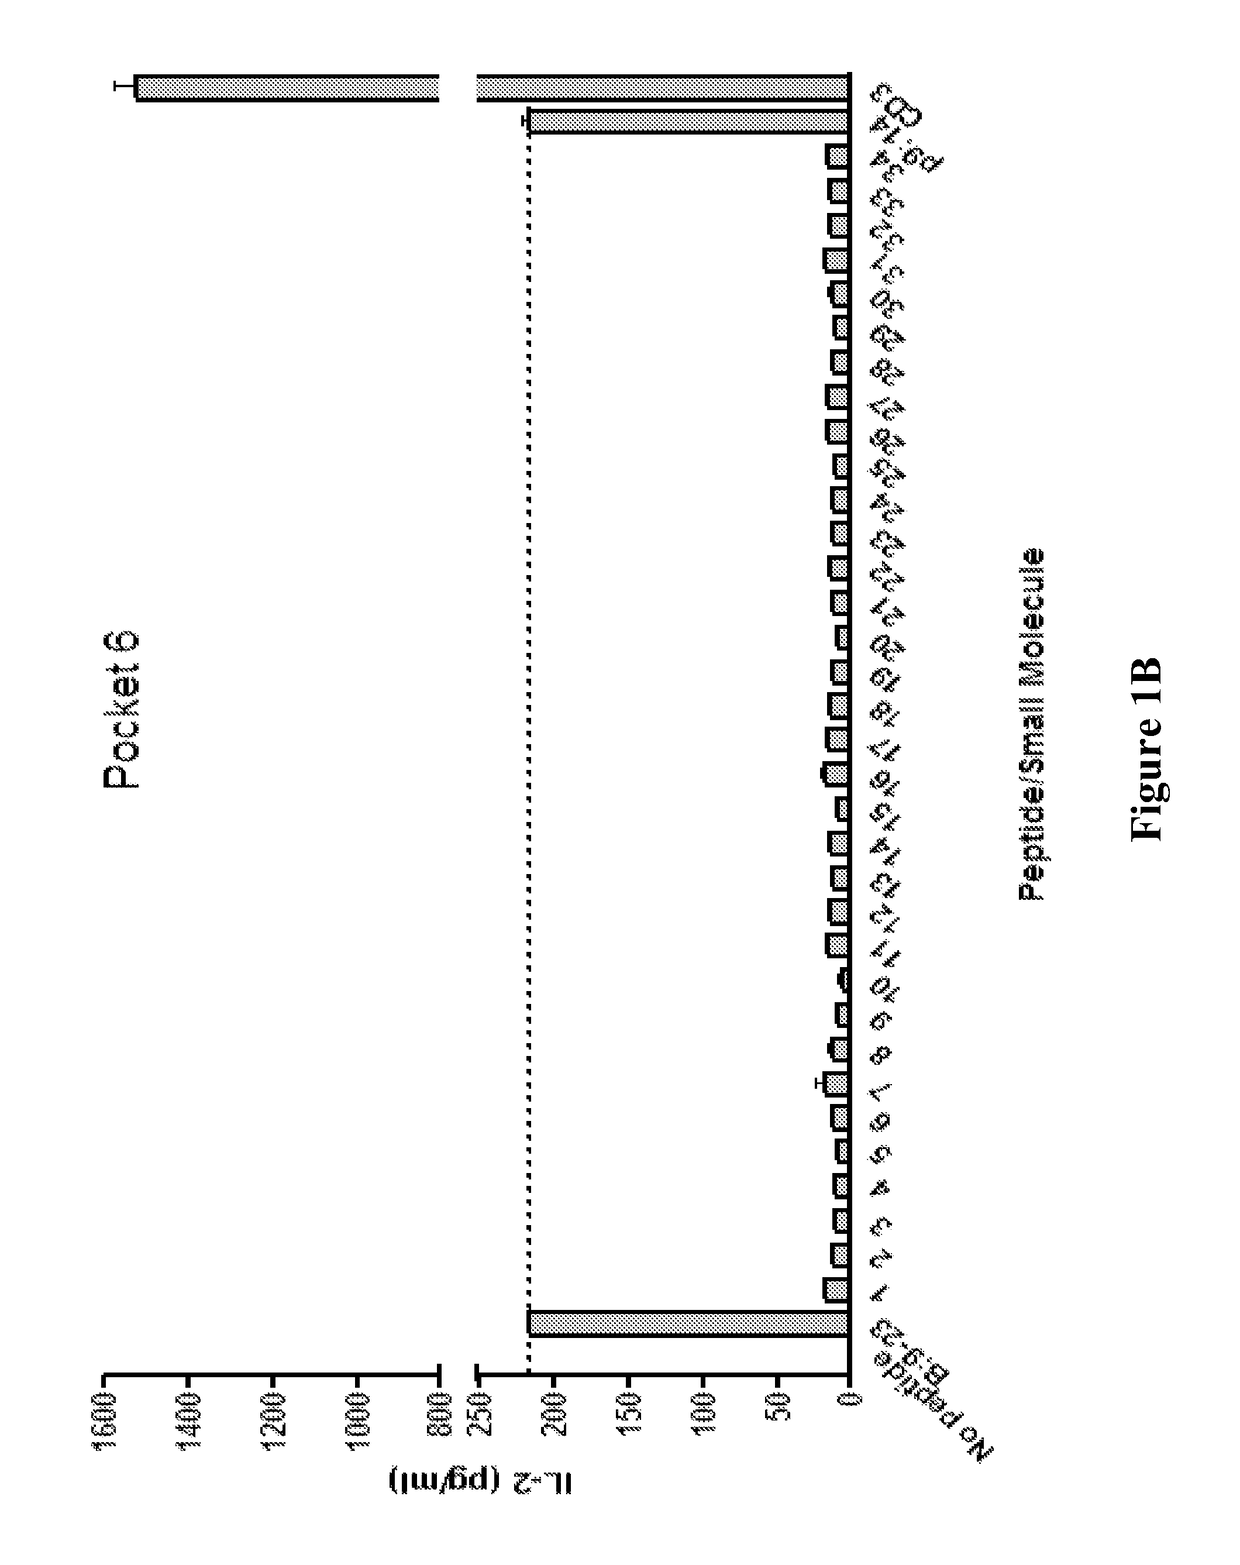 Compounds that modulate autoimmunity and methods of using the same